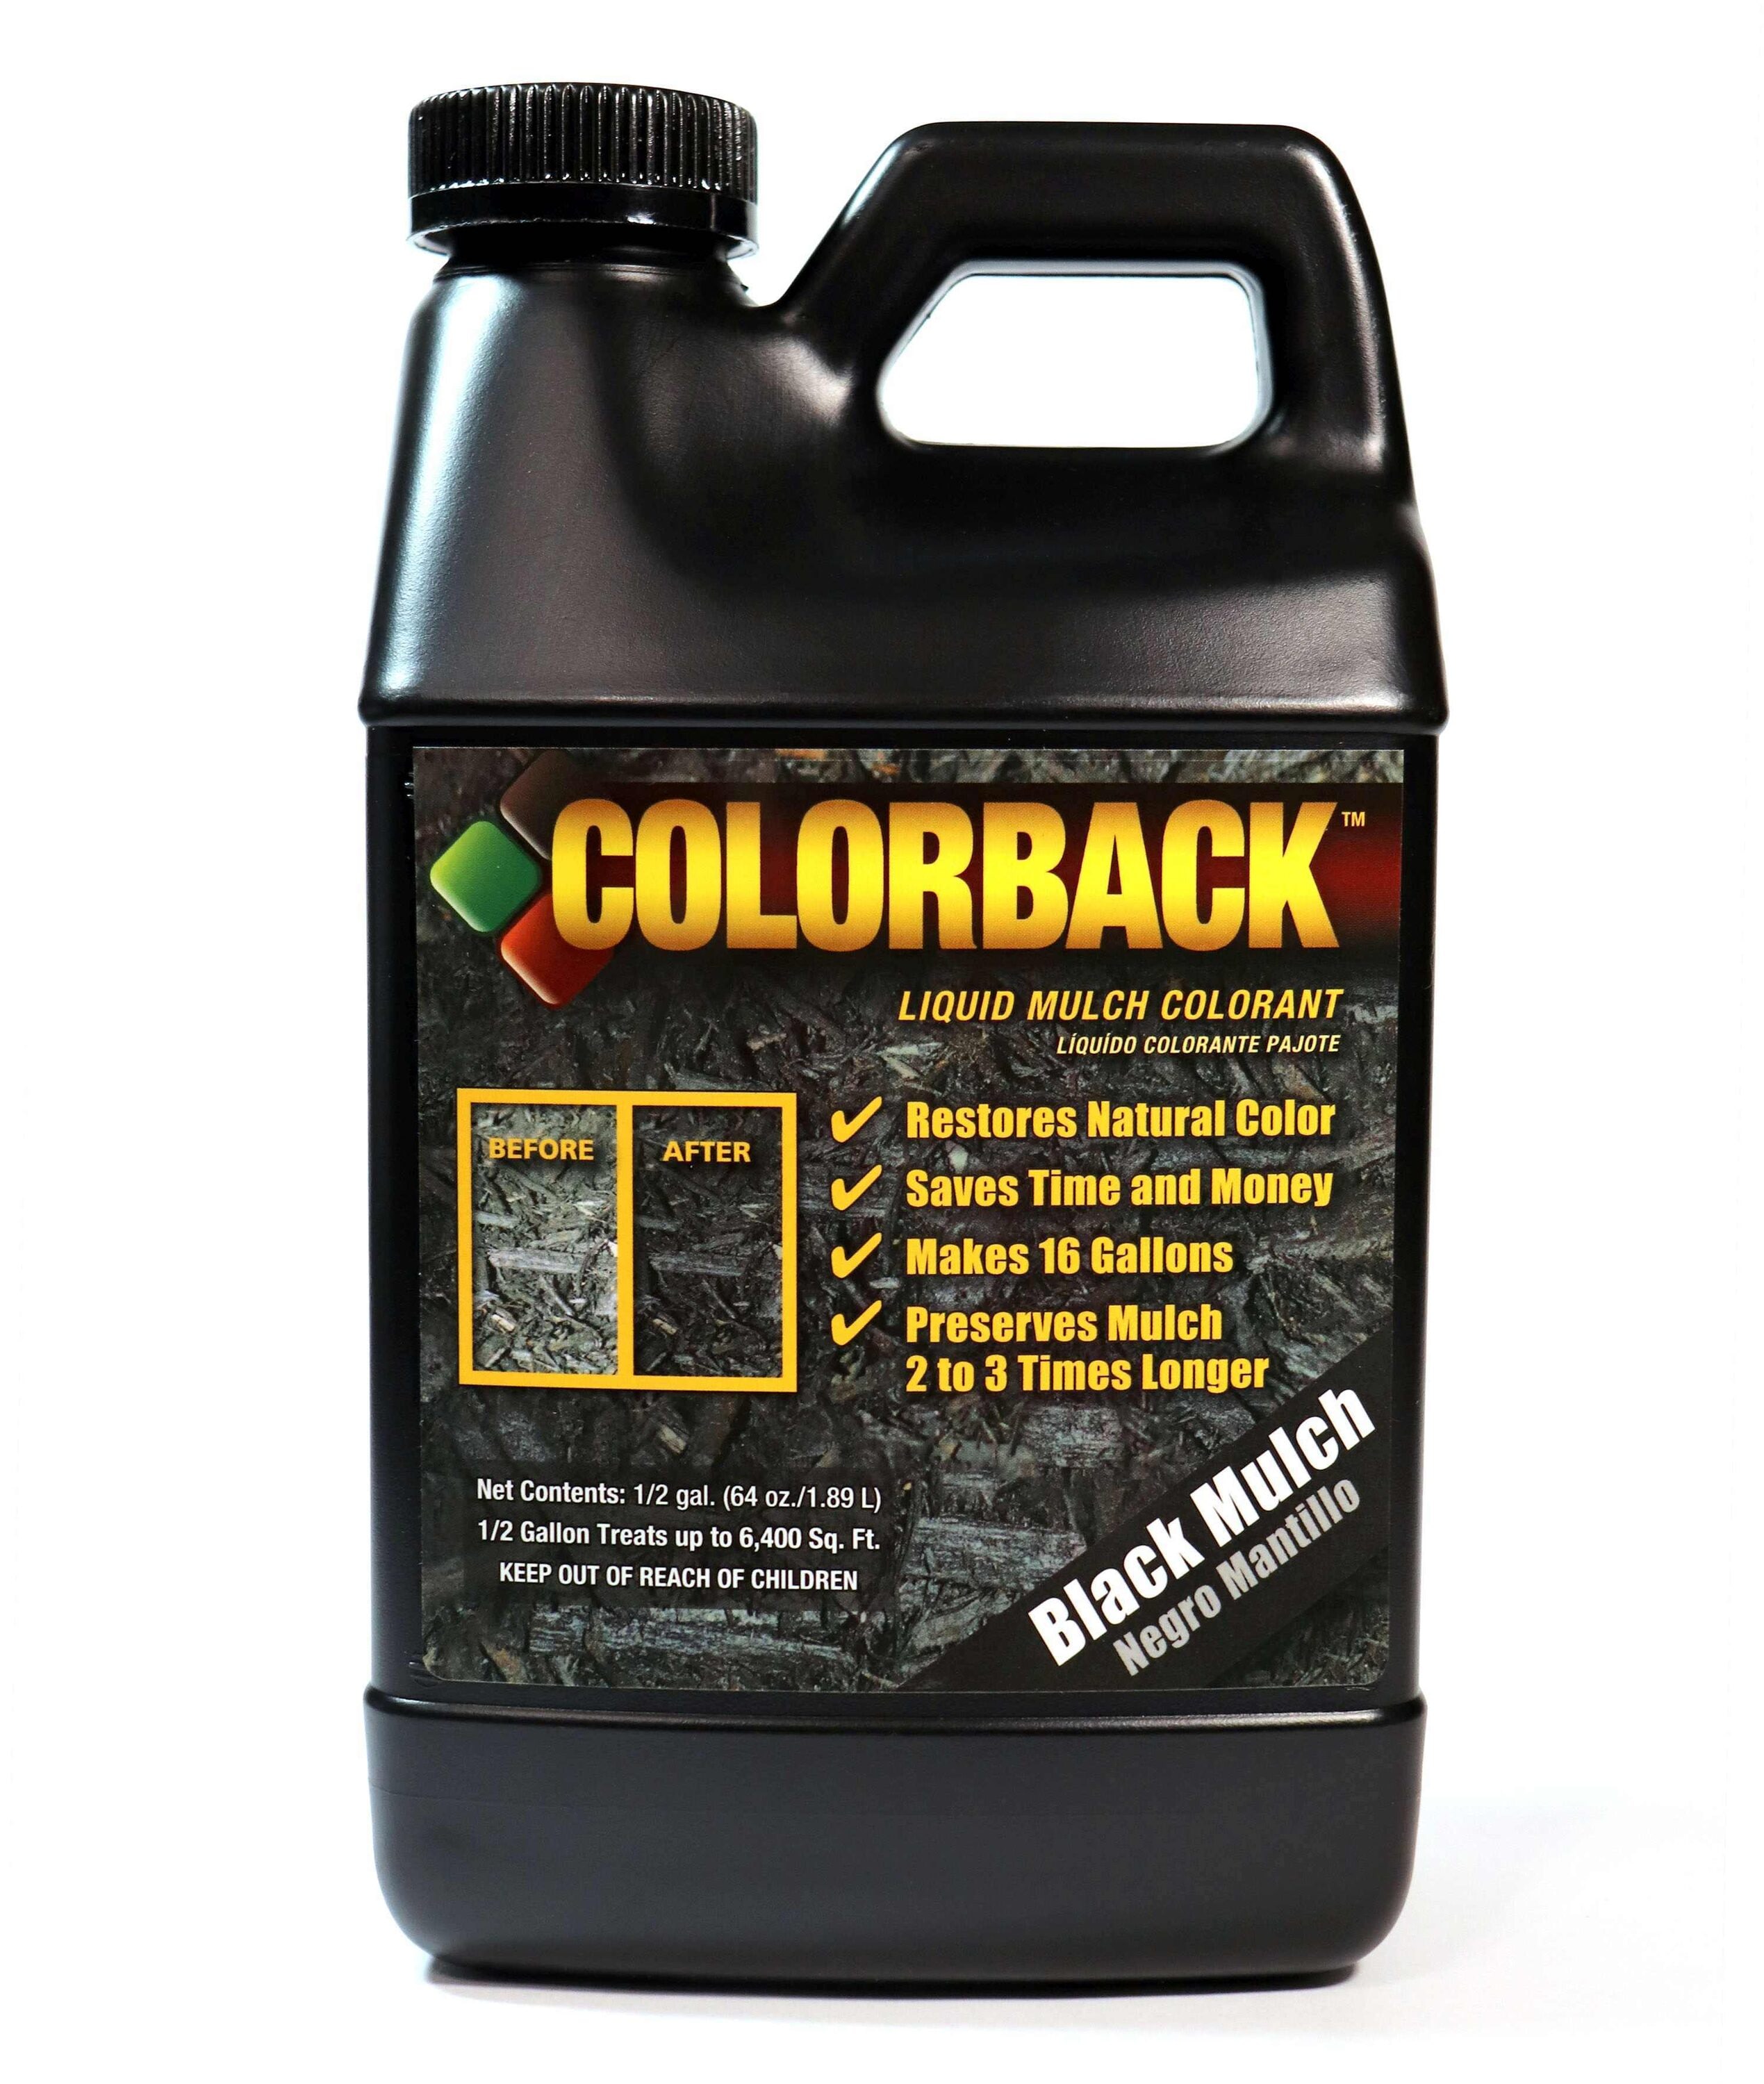 Peach Country Premium Mulch Dye Color Concentrate - qt, gal, 2.5 gal. - Your Choice Black / 1 Gallon